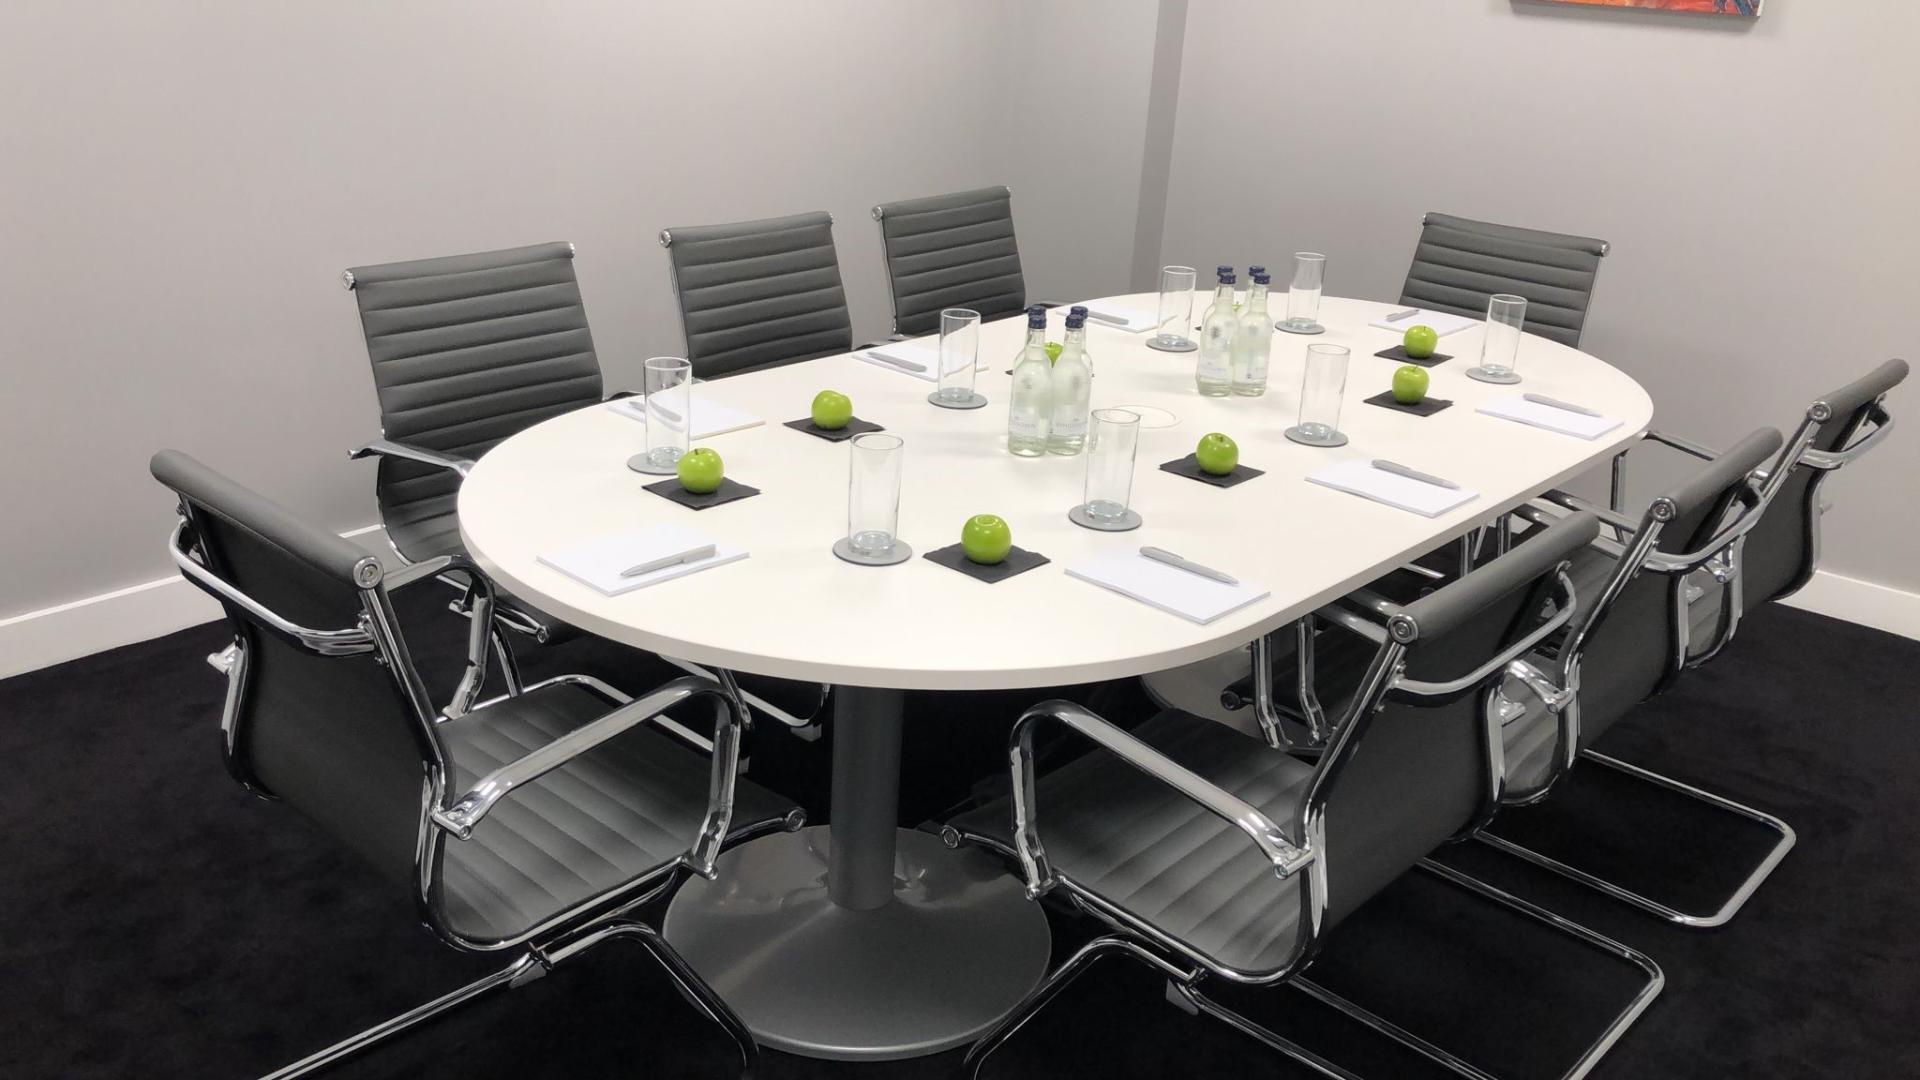 Meeting Rooms for Hire in Vauxhall